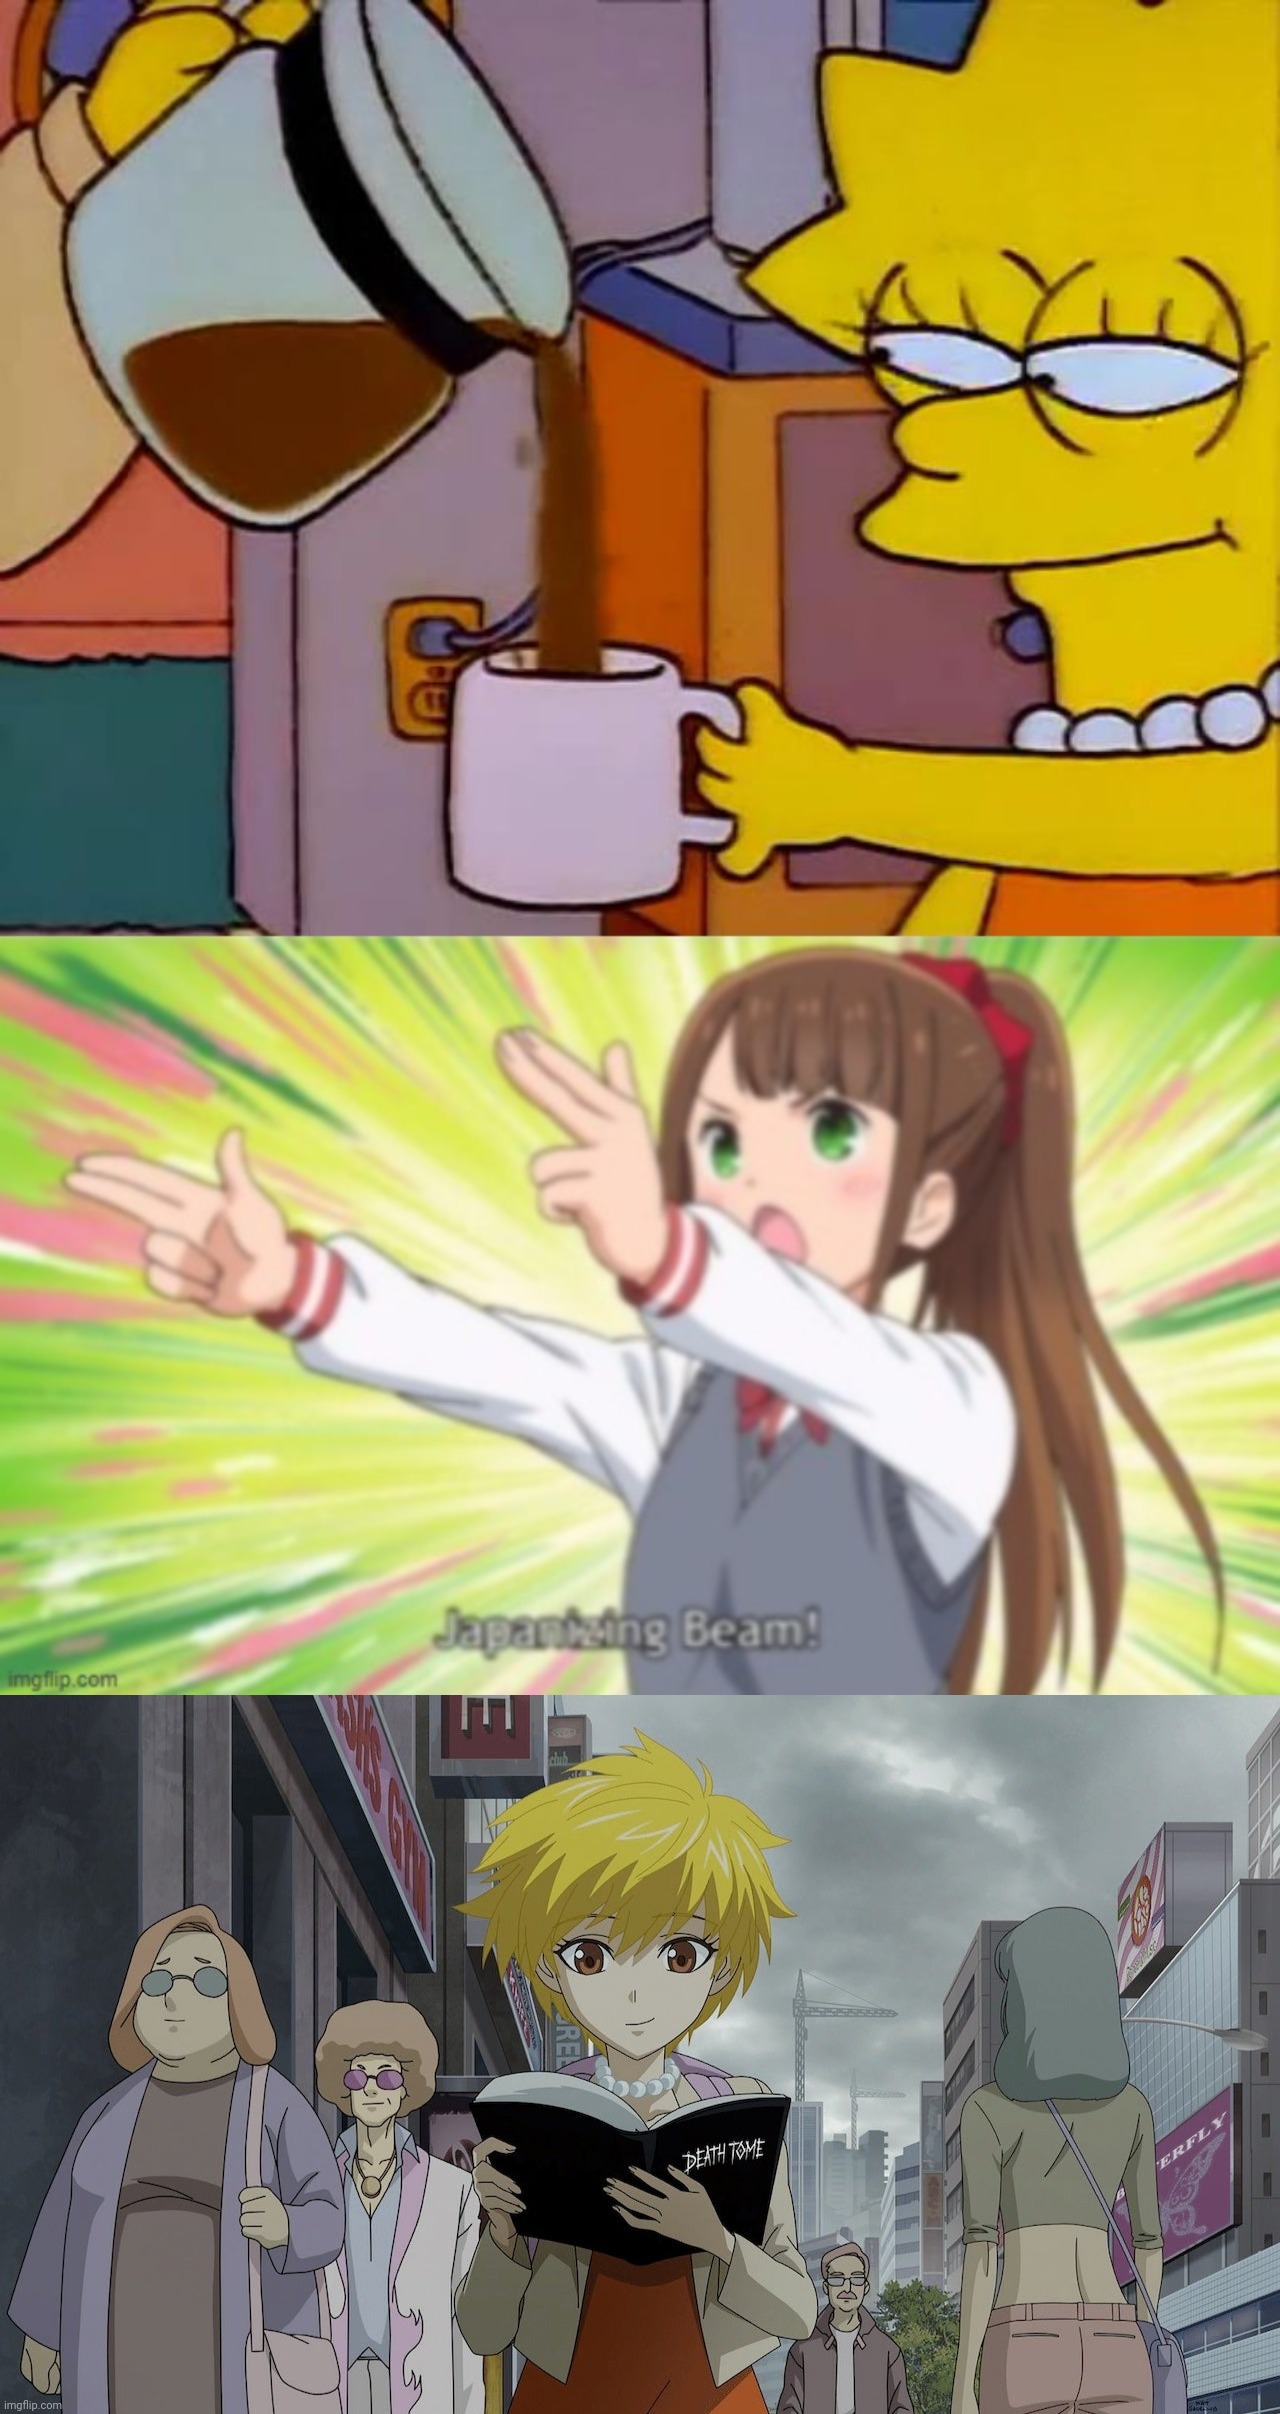 A monster combination | image tagged in lisa simpson coffee that x shit,japanizing beam,death note,the simpsons,anime | made w/ Imgflip meme maker